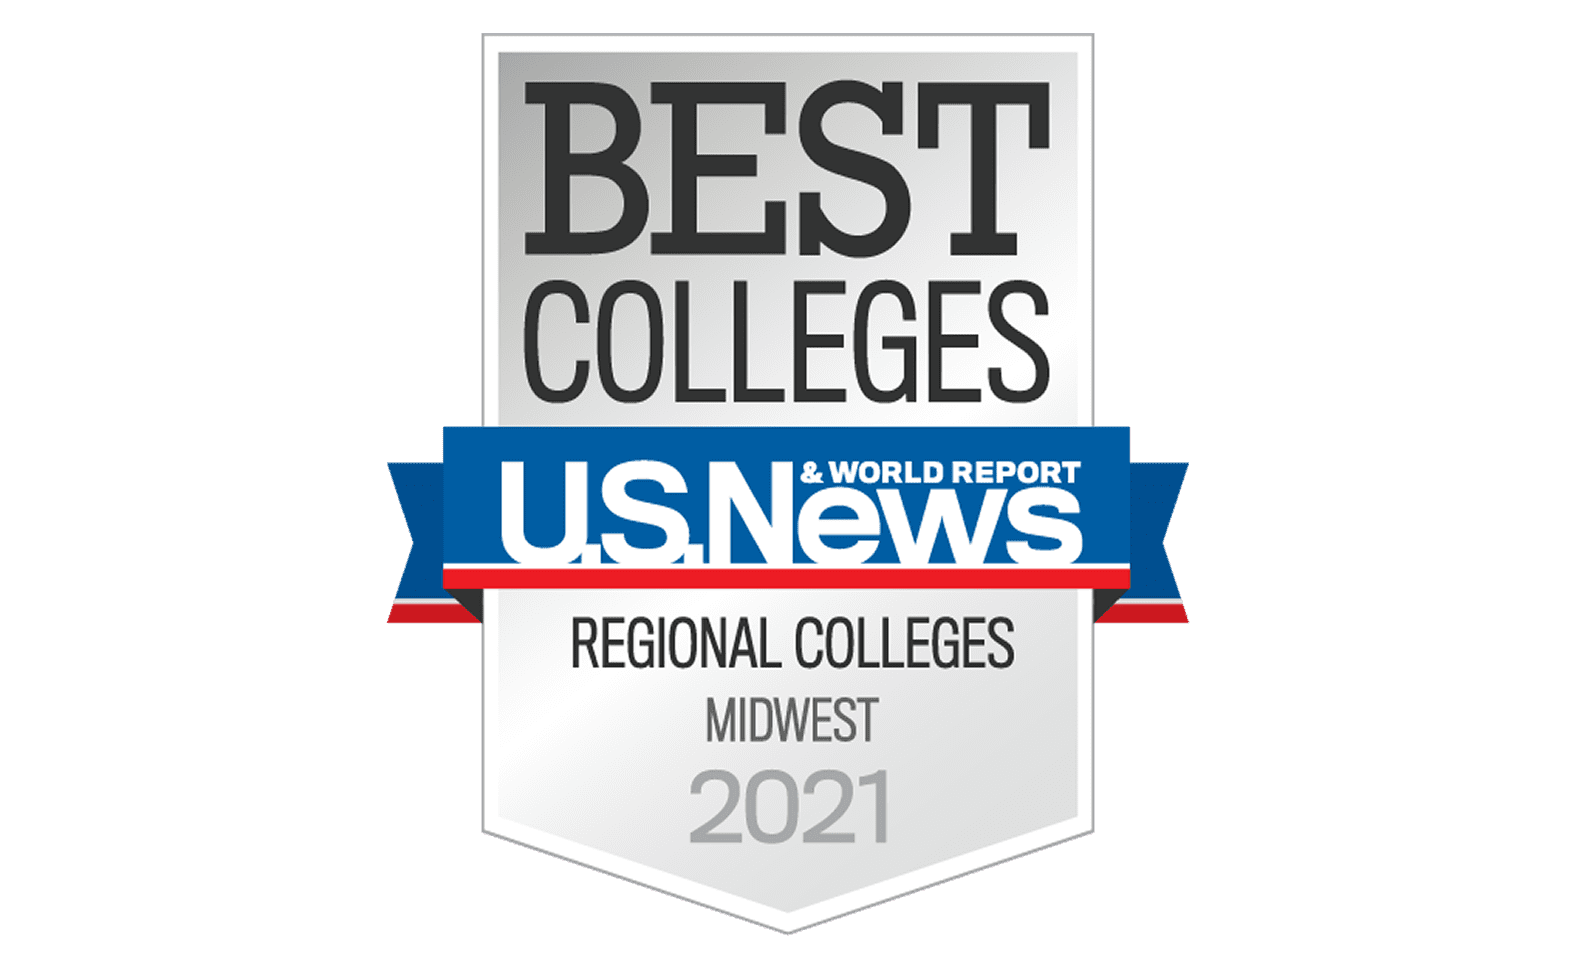 U.S.News Top 25 Regional Colleges - Midwest